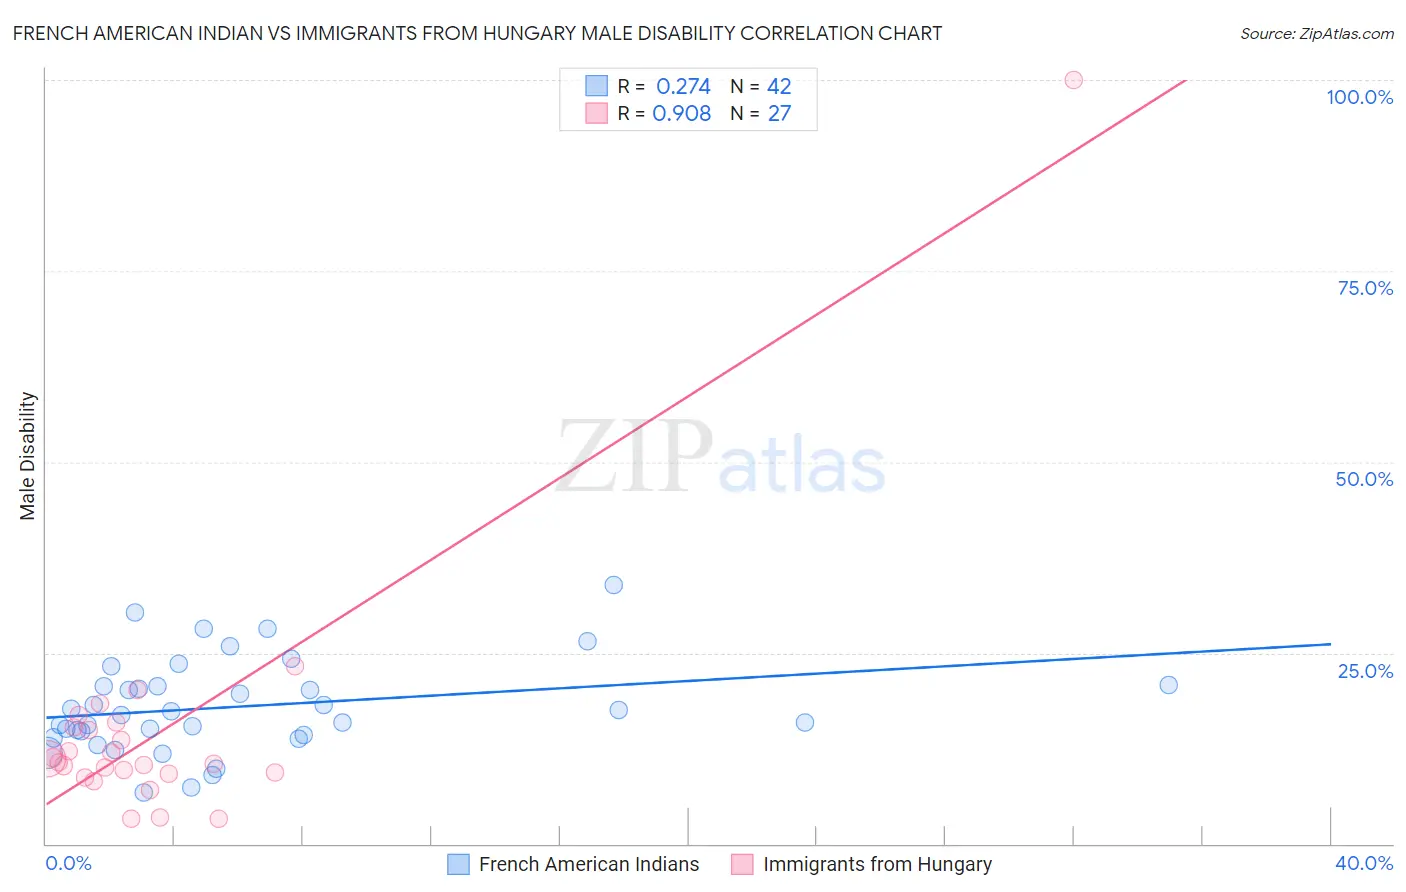 French American Indian vs Immigrants from Hungary Male Disability